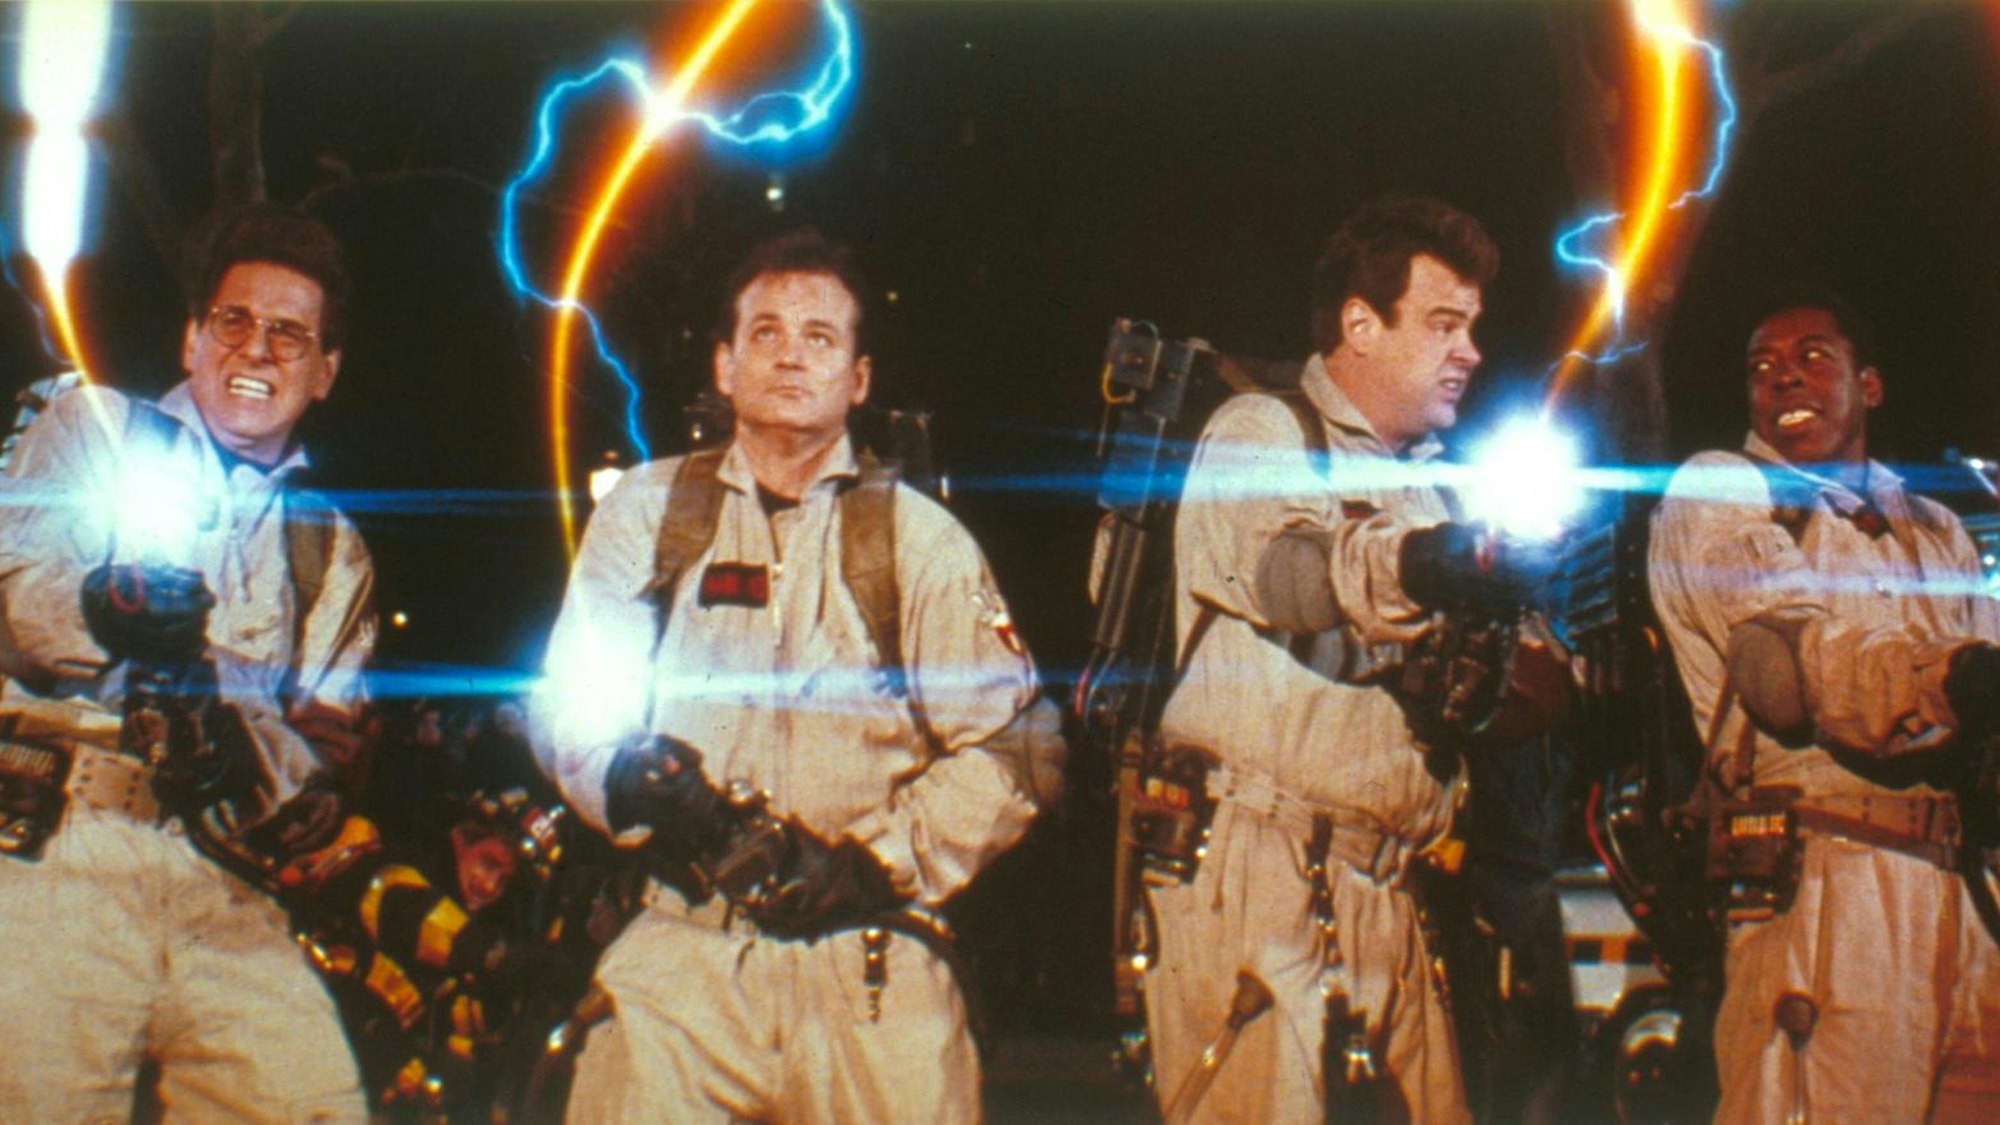 Ghostbusters imago EntertainmentPictures